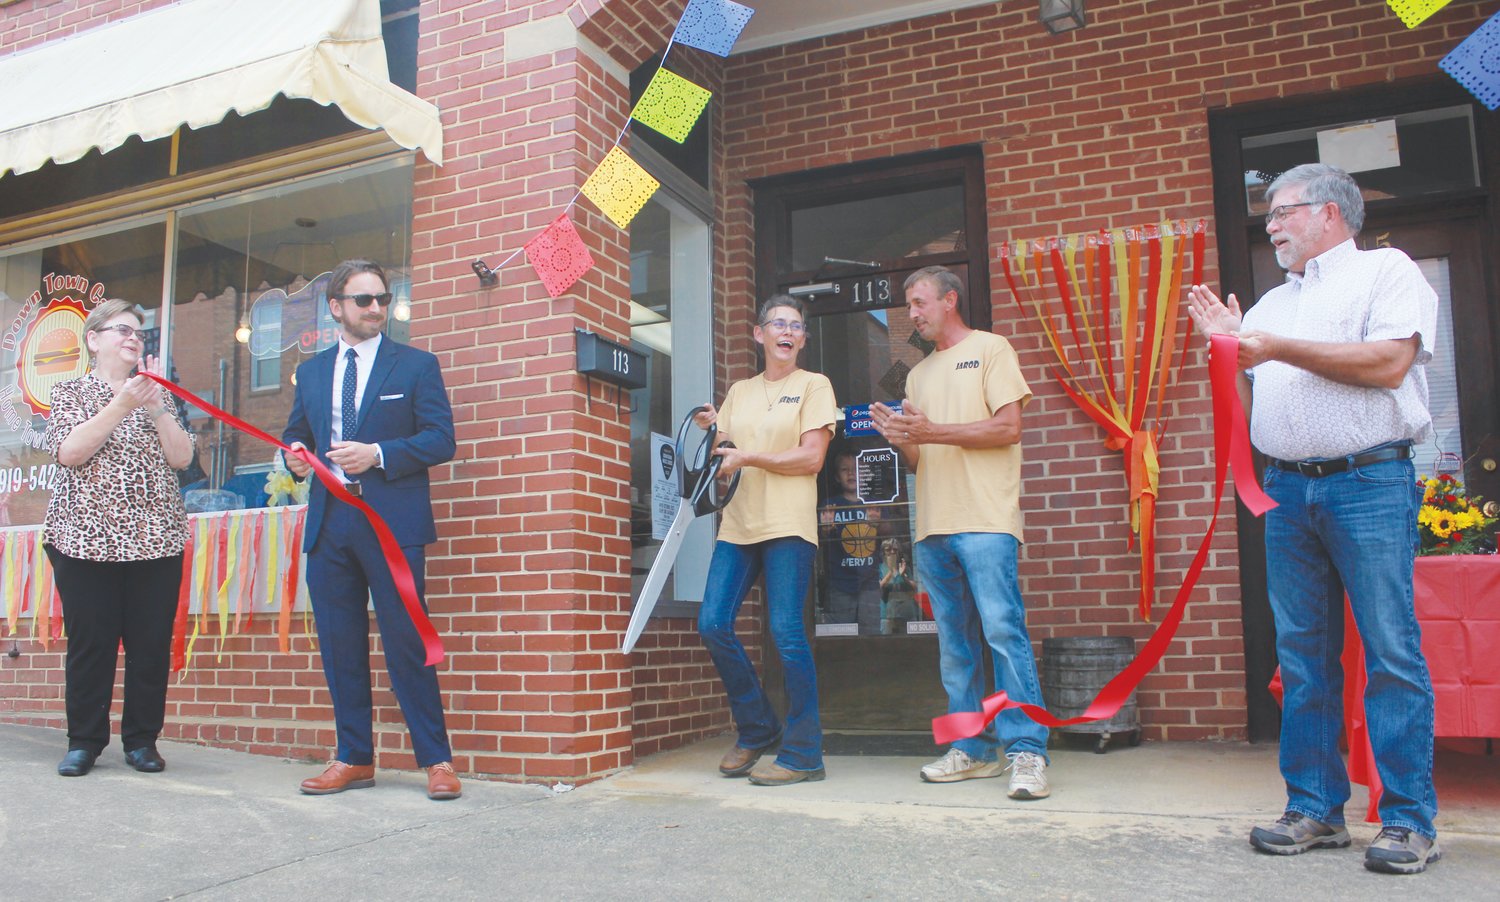 Down Town Cafe owner and operator Sherrie Hatfield, center, cuts the offical ribbon, commemorating the opening of her restaurant on Thursday in downtown Siler City. Mayor Chip Price (right) was also in attendance to celebrate.